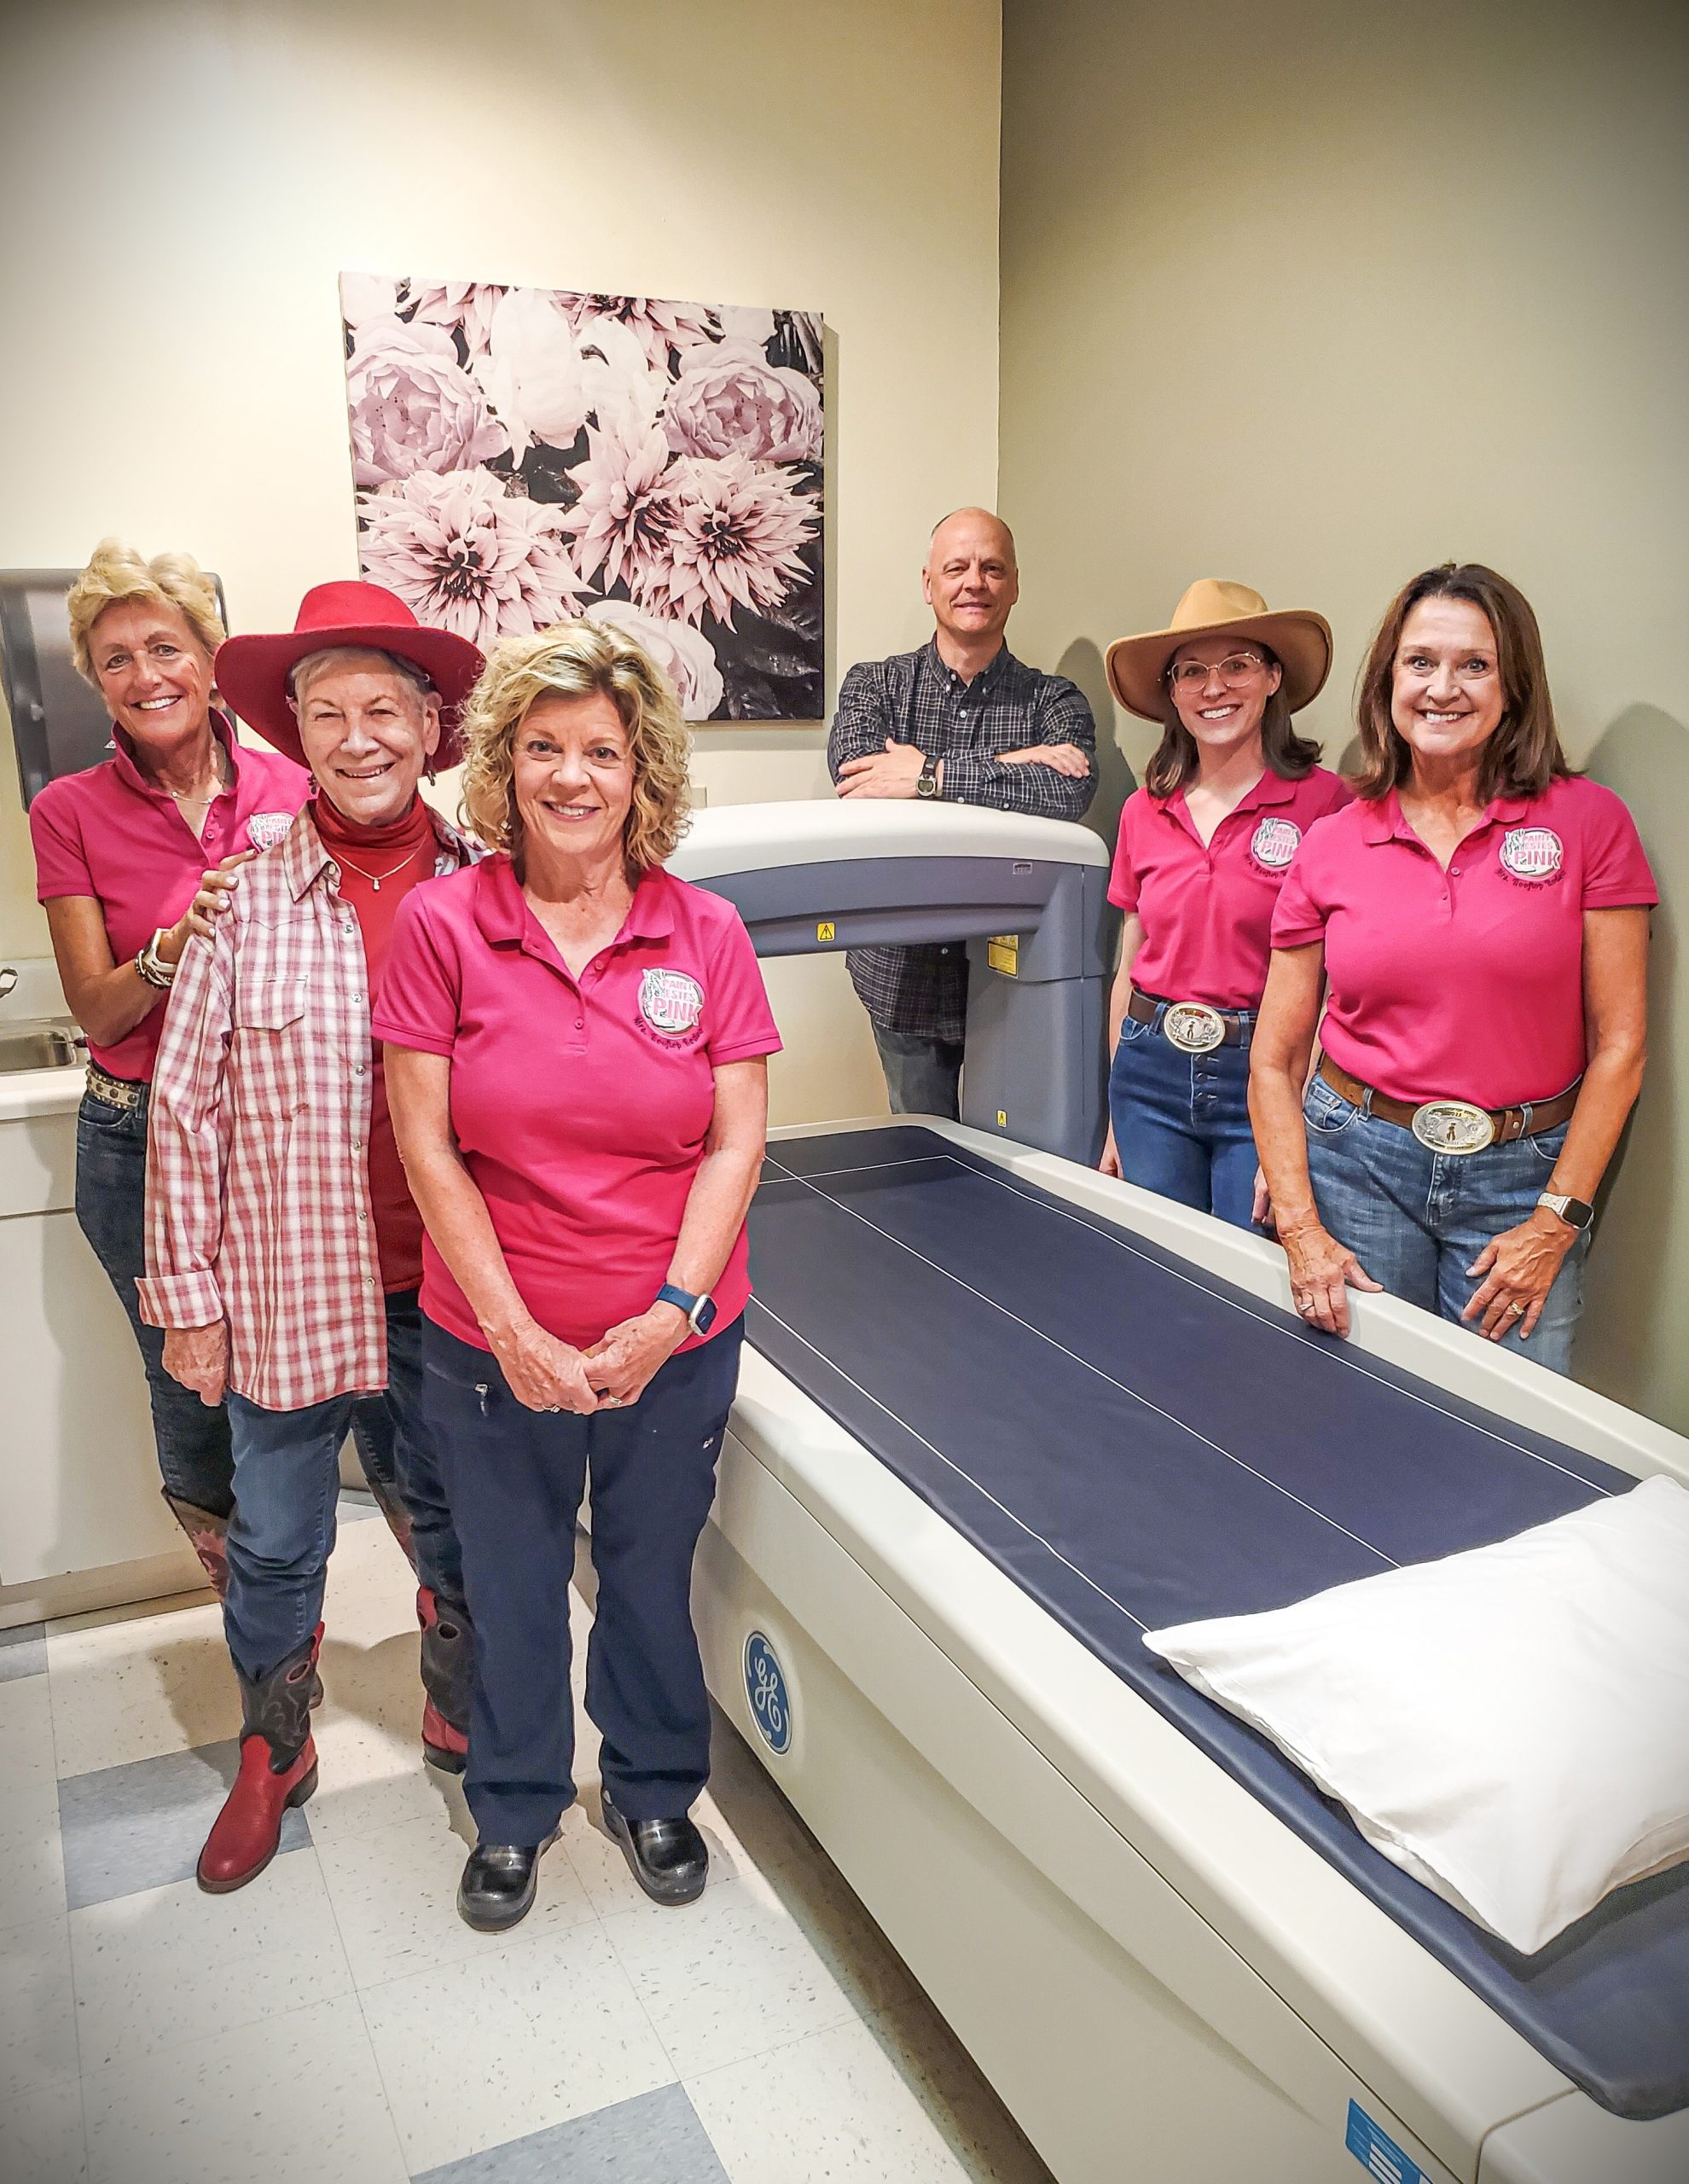 A group of five women and one man stand next to a medical machine in a room with a floral painting on the wall. The women are wearing matching pink shirts and cowboy hats.